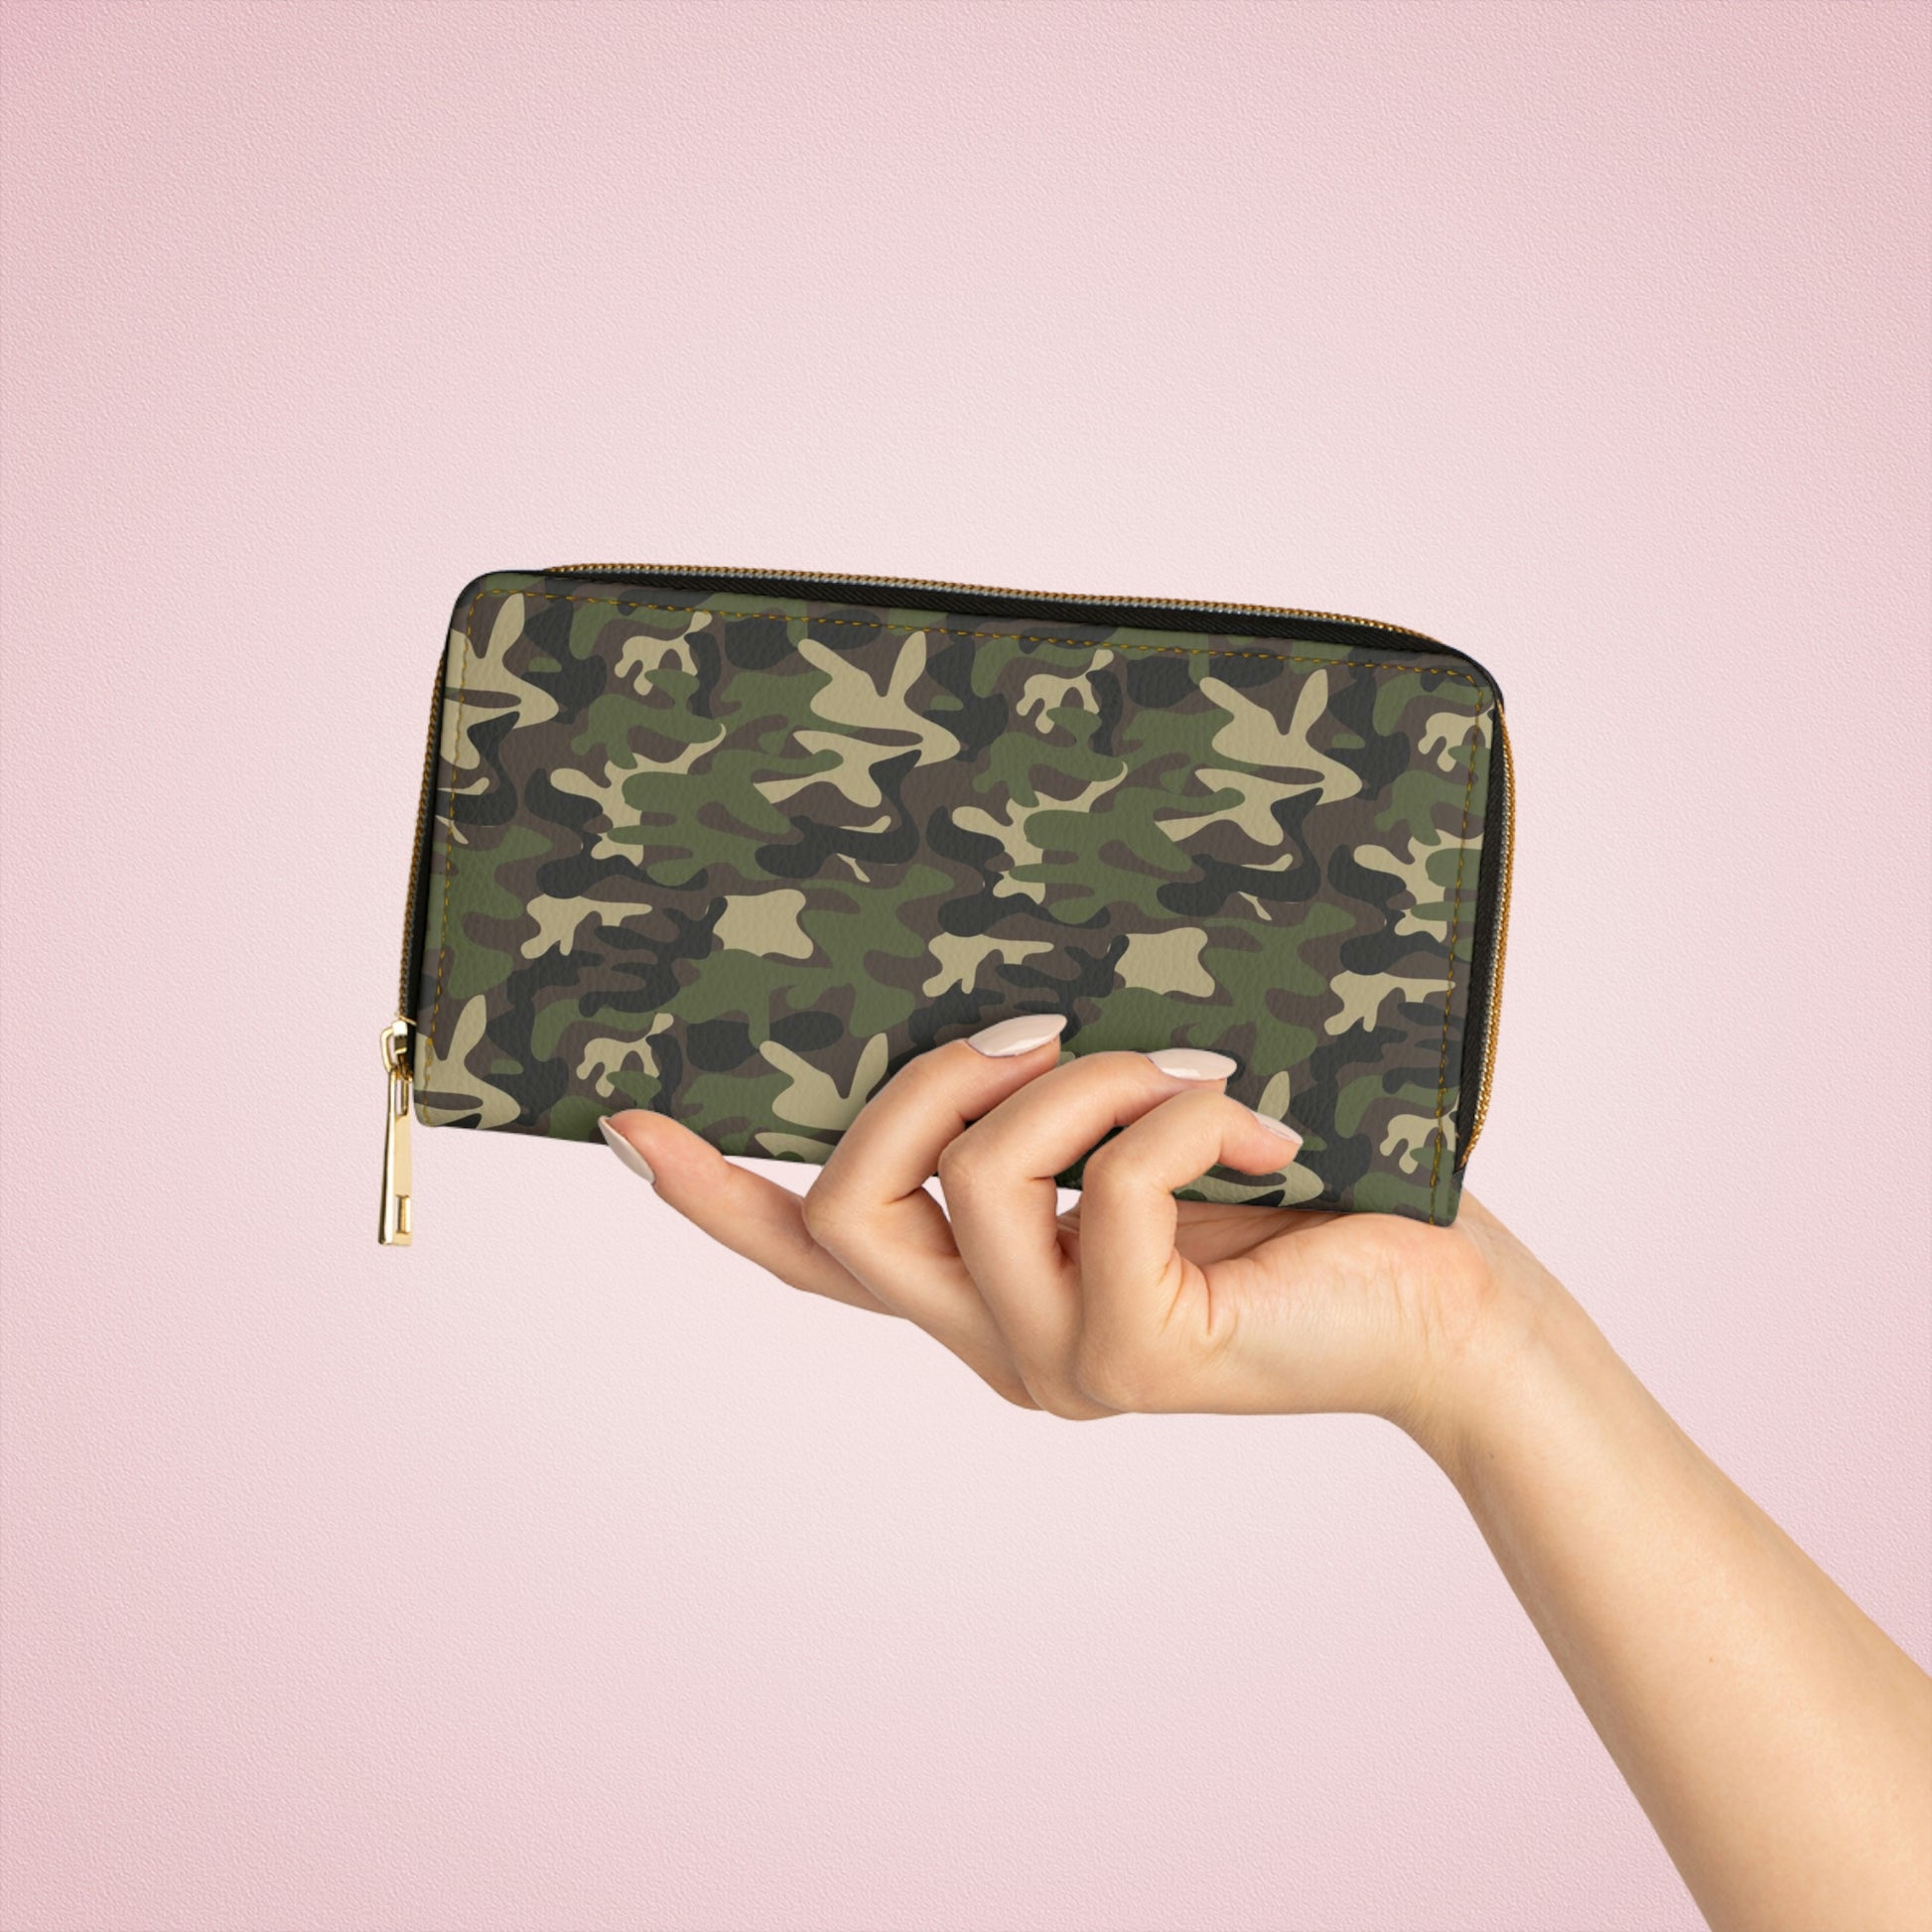 Camo Faux Leather Wallet Women, Camouflage Green Zipper Zip Around Coins Credit Cards Pocket Cash Ladies Pouch Slim Clutch Purse Starcove Fashion